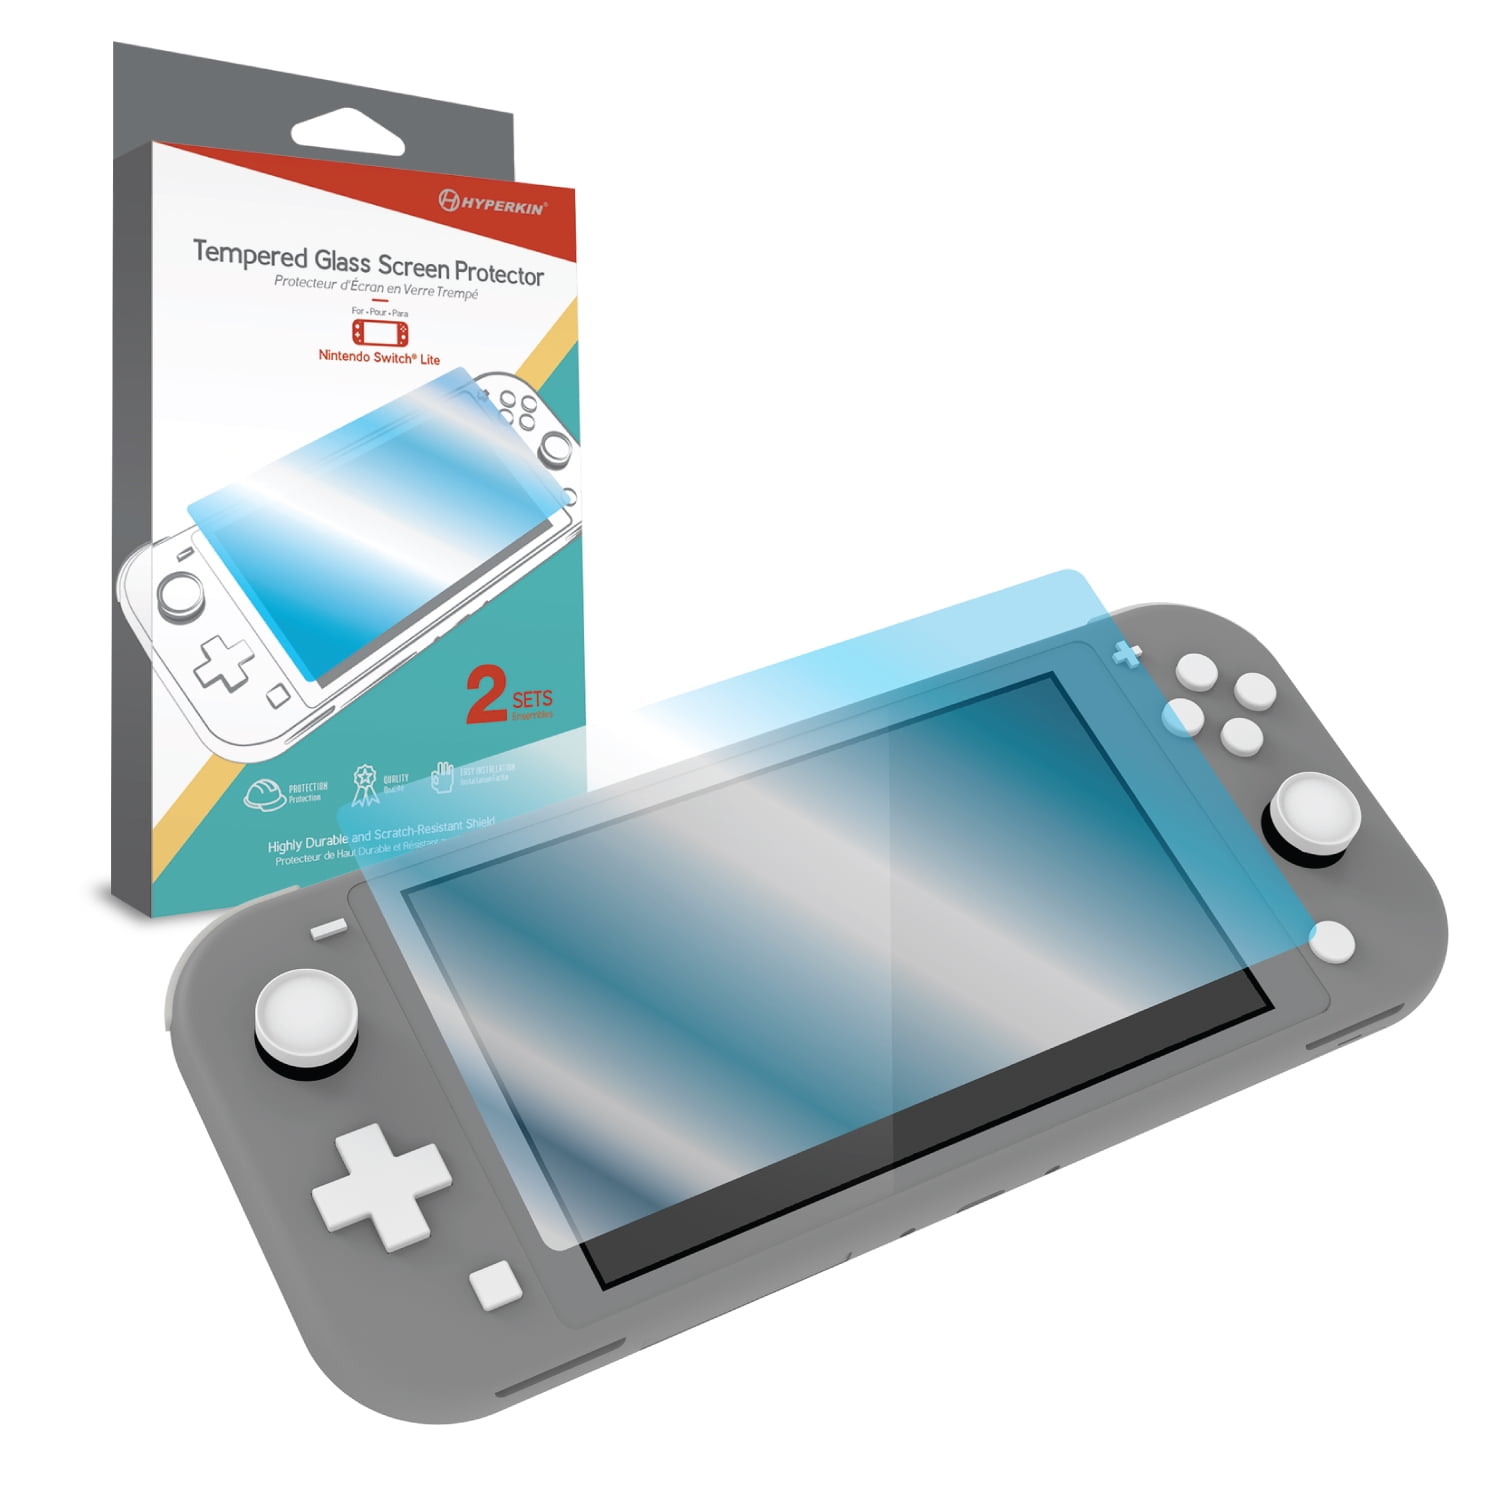 Hyperkin Tempered Glass Screen Protector for Nintendo Switch® Lite (2-Sets)  